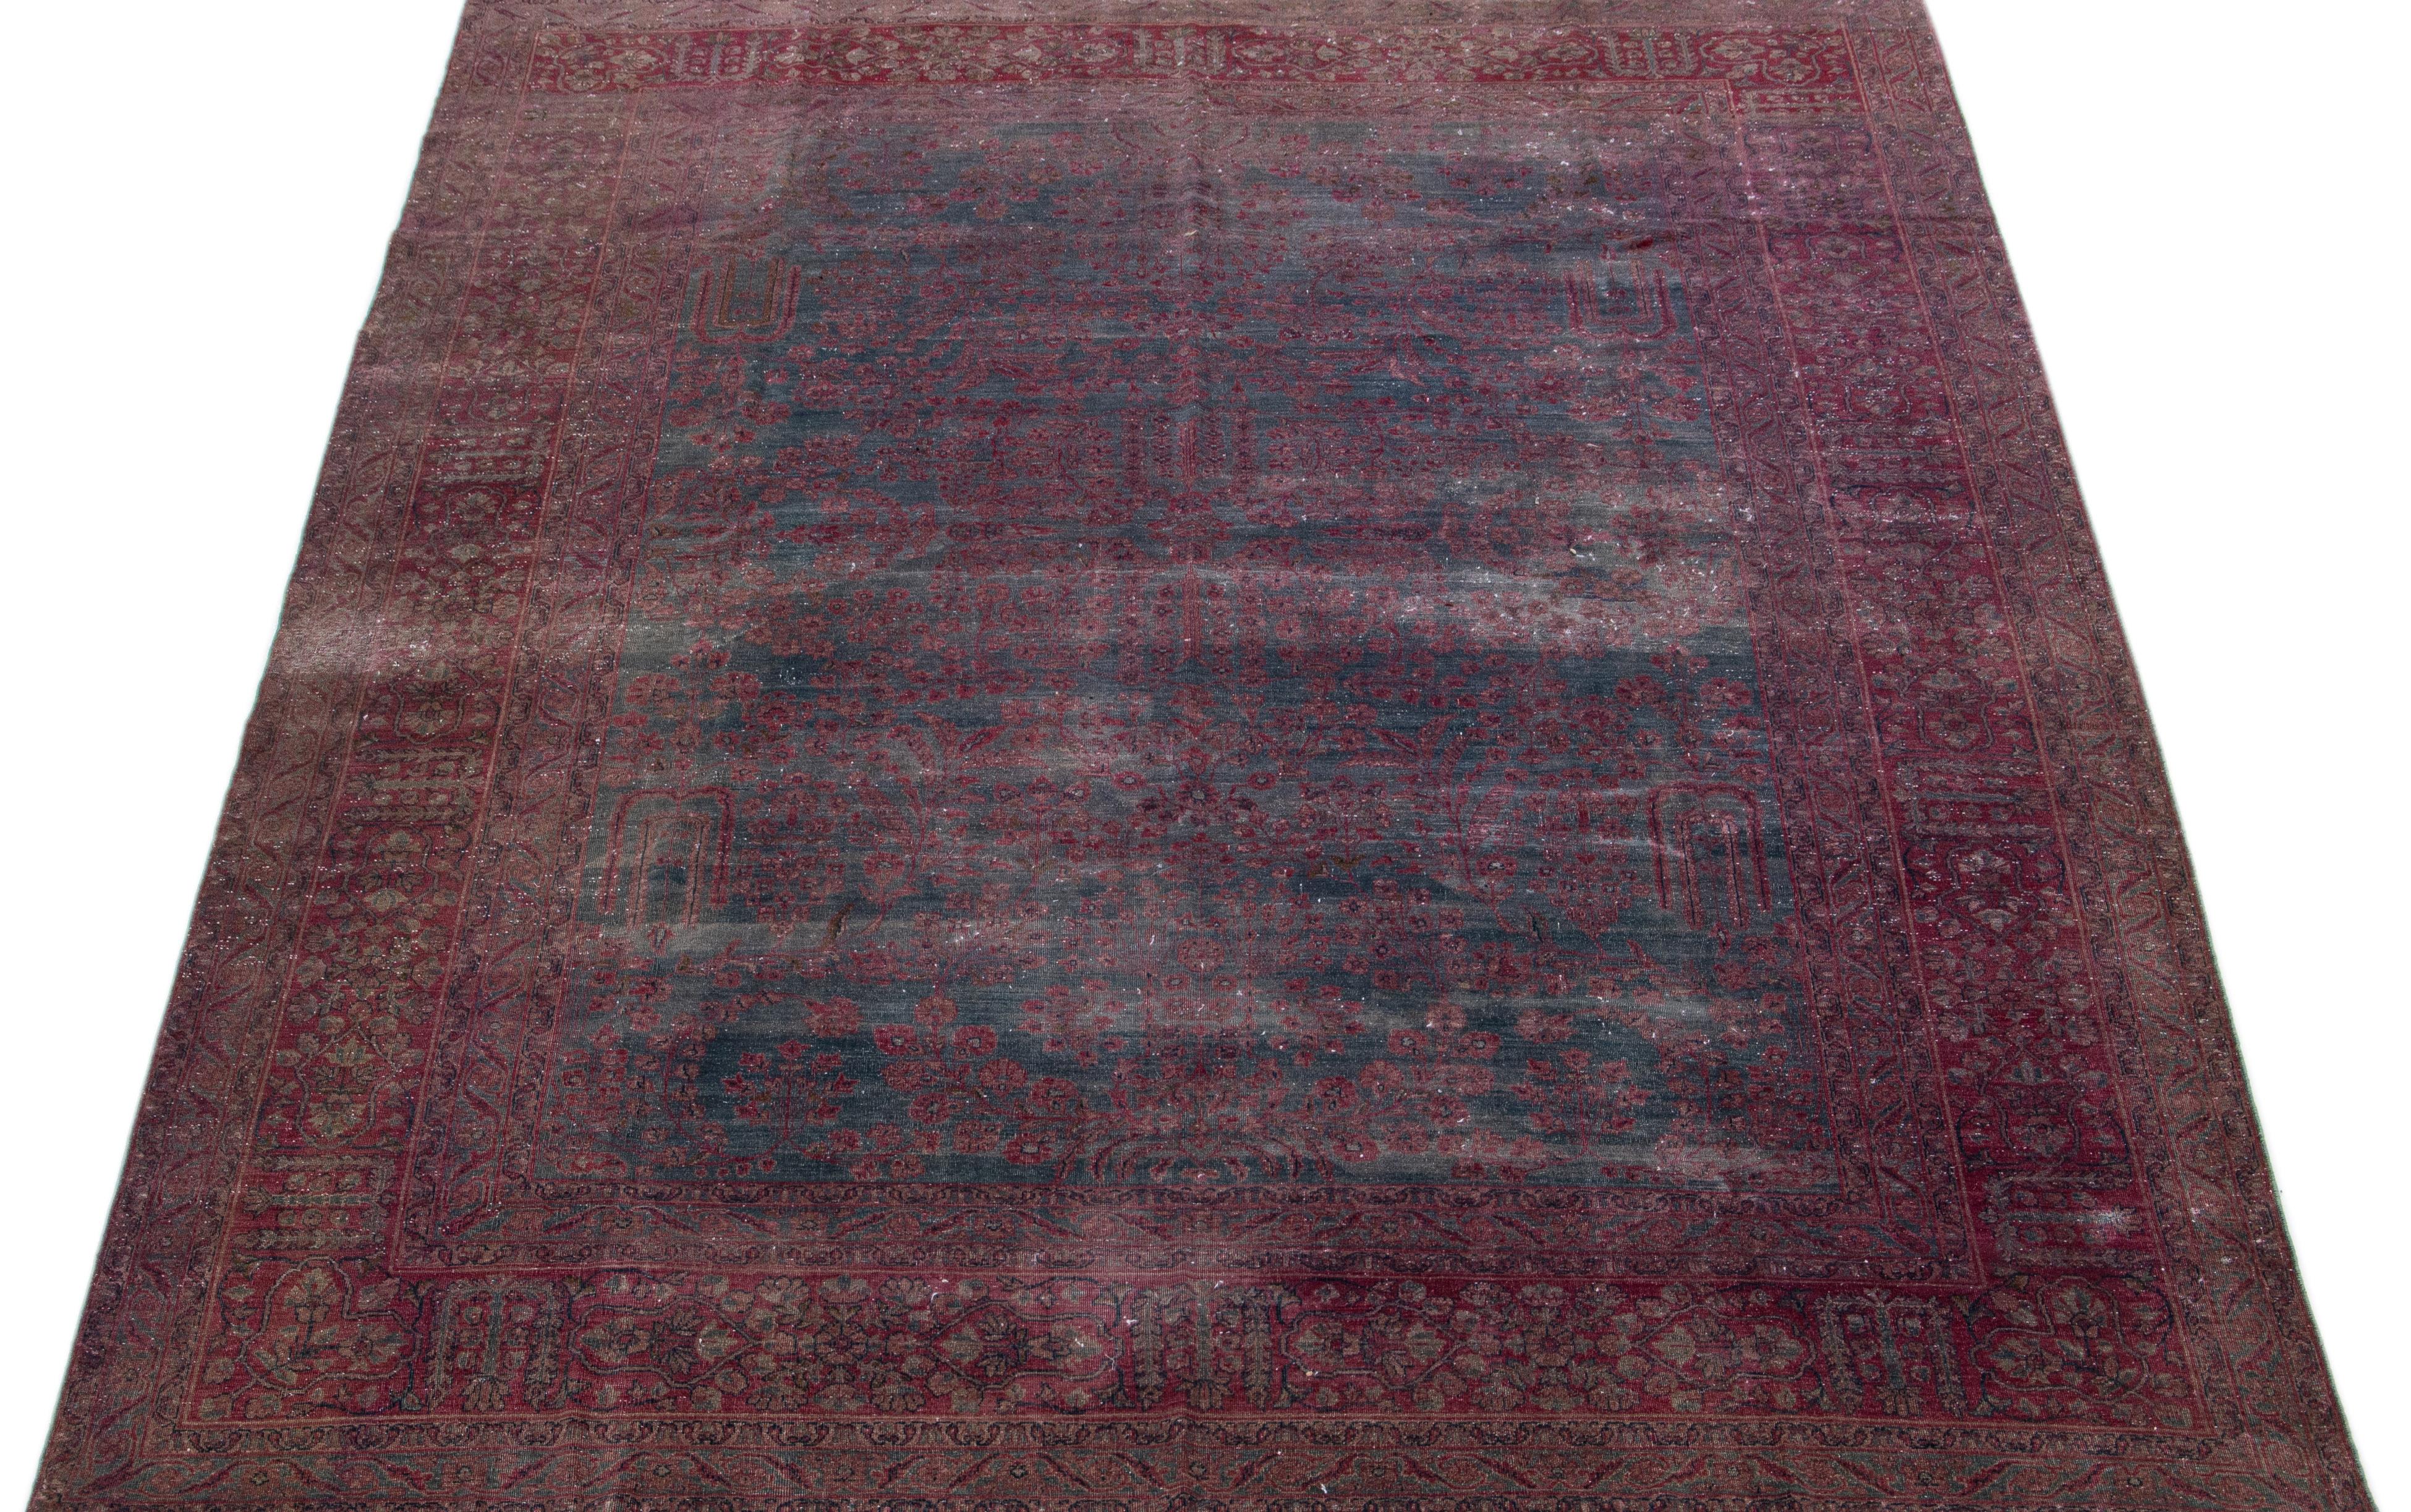 Beautiful antique Persian distressed hand-knotted wool rug with a gray color field. This piece has red accents in a gorgeous all-over floral design.

This rug measures: 8'10' x 11'6